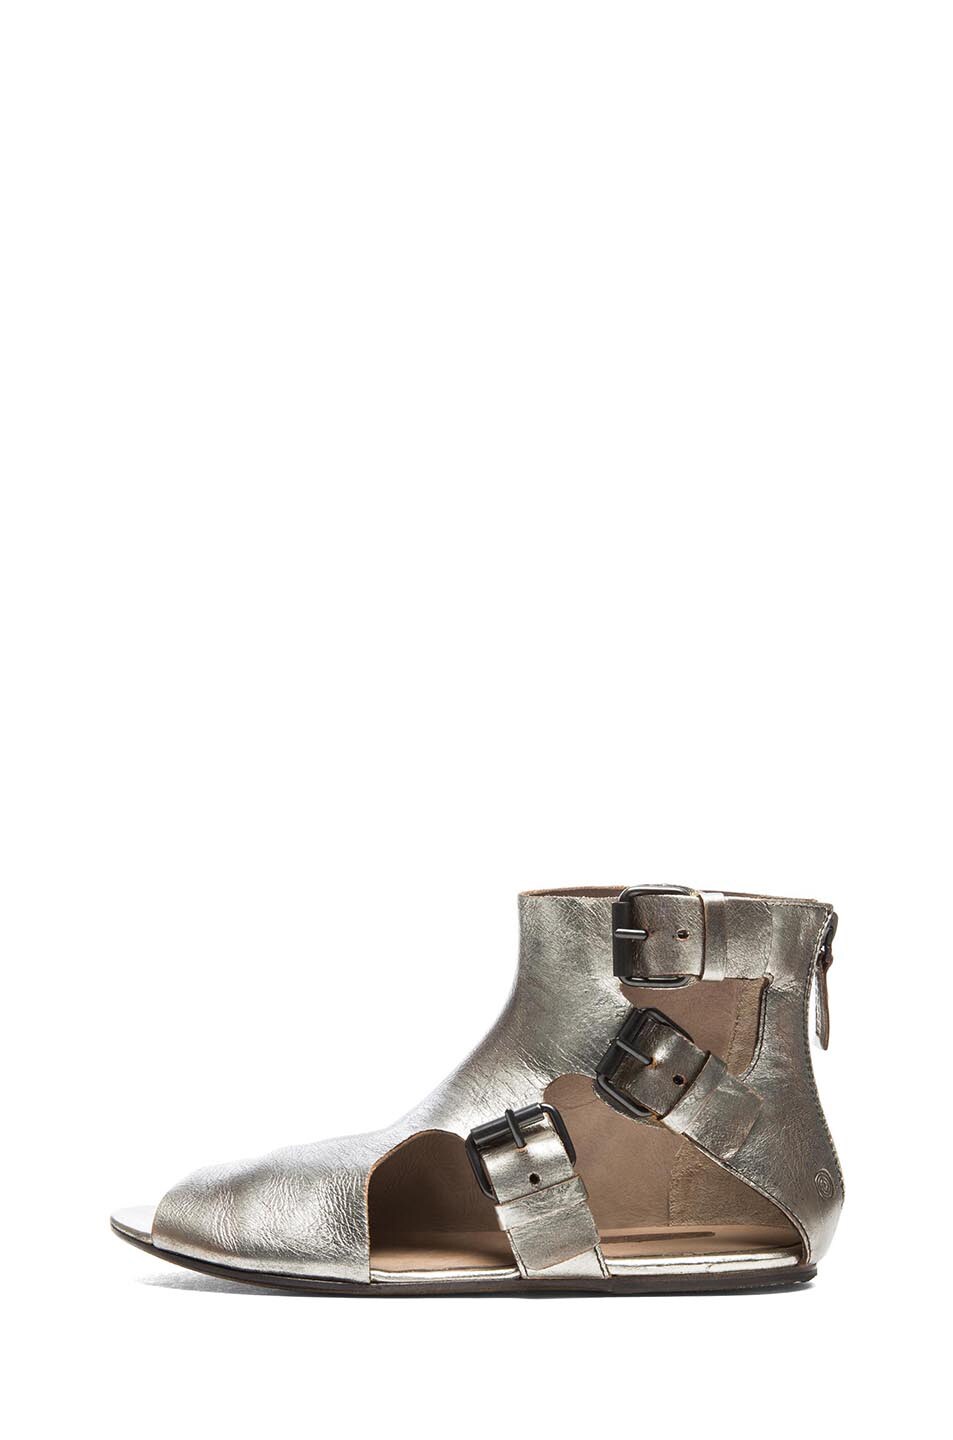 Image 1 of Marsell Arsella Metallic Leather Strap Sandals in Platinum